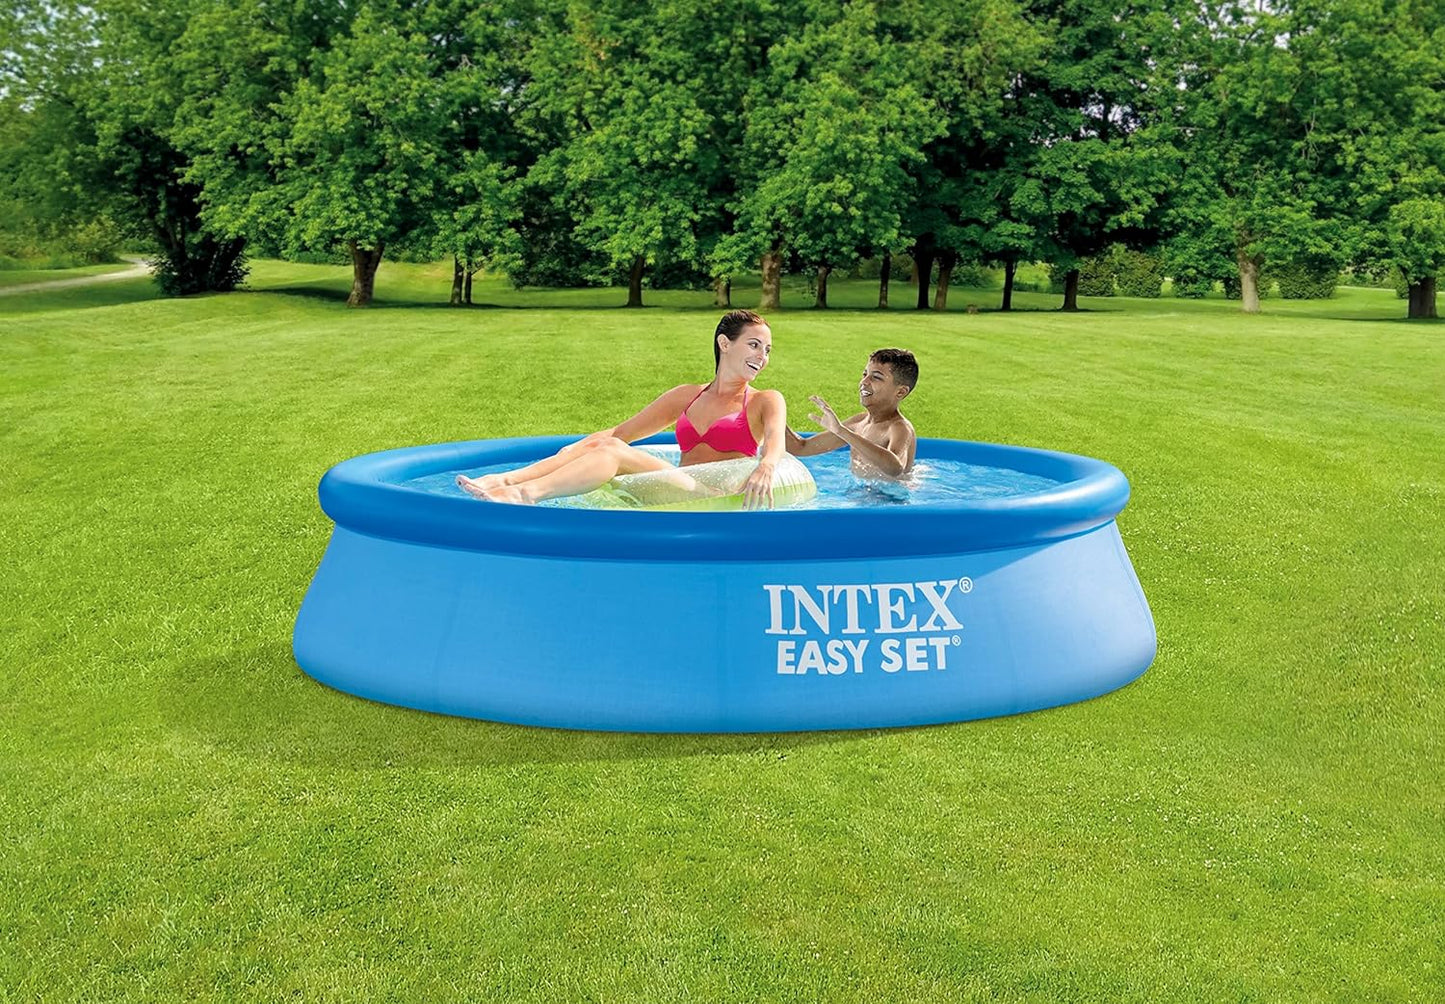 Intex 8 ft X 24 Inch Easy Set Inflatable Puncture Resistant Circular Above Ground Portable Outdoor Family Swimming Pool, Blue